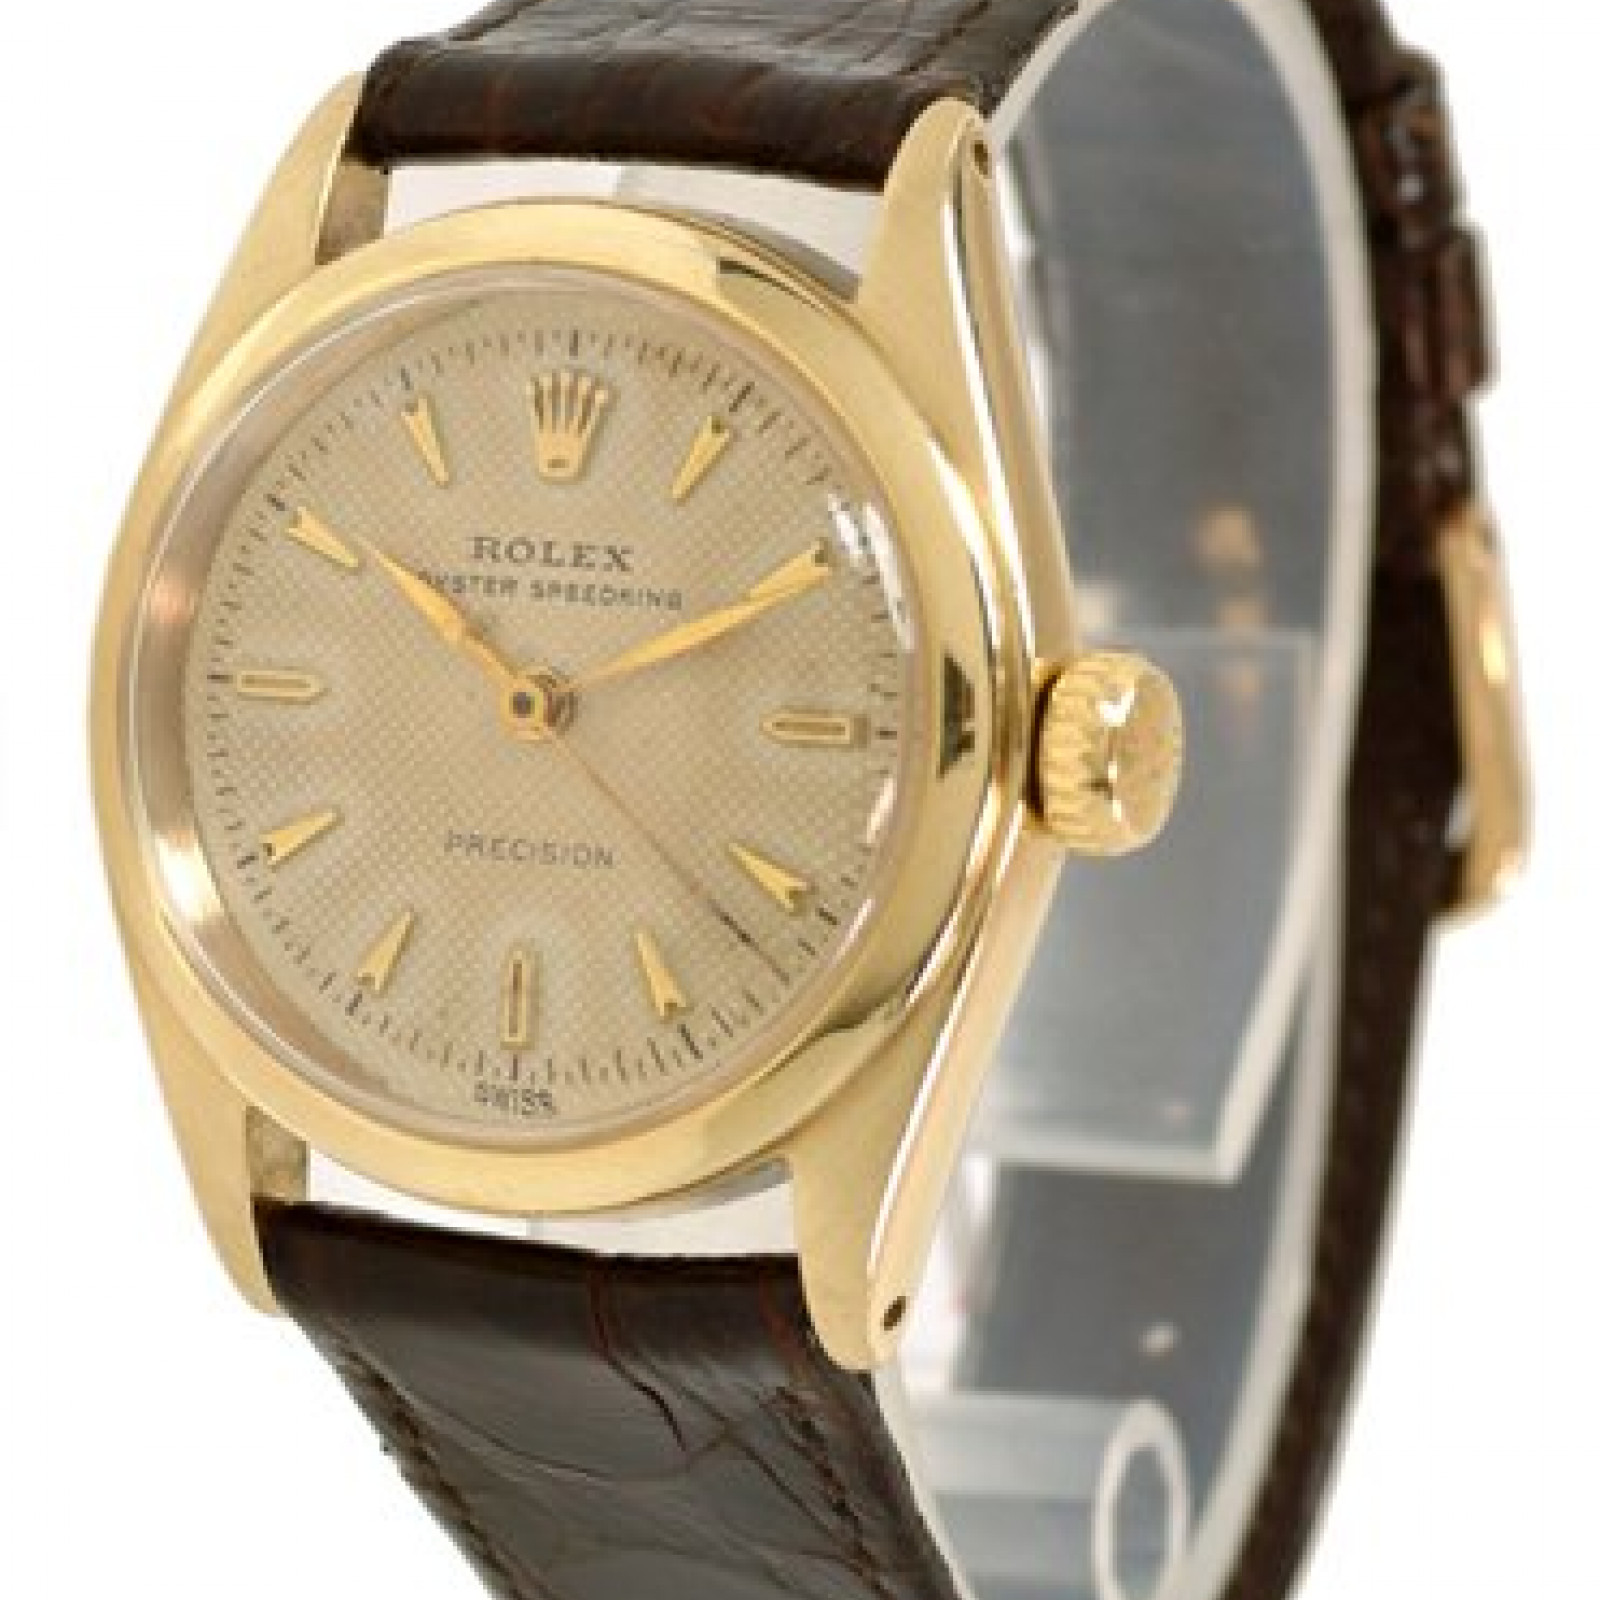 Vintage Rolex Oyster Speedking 6020 Gold with Champagne Dial